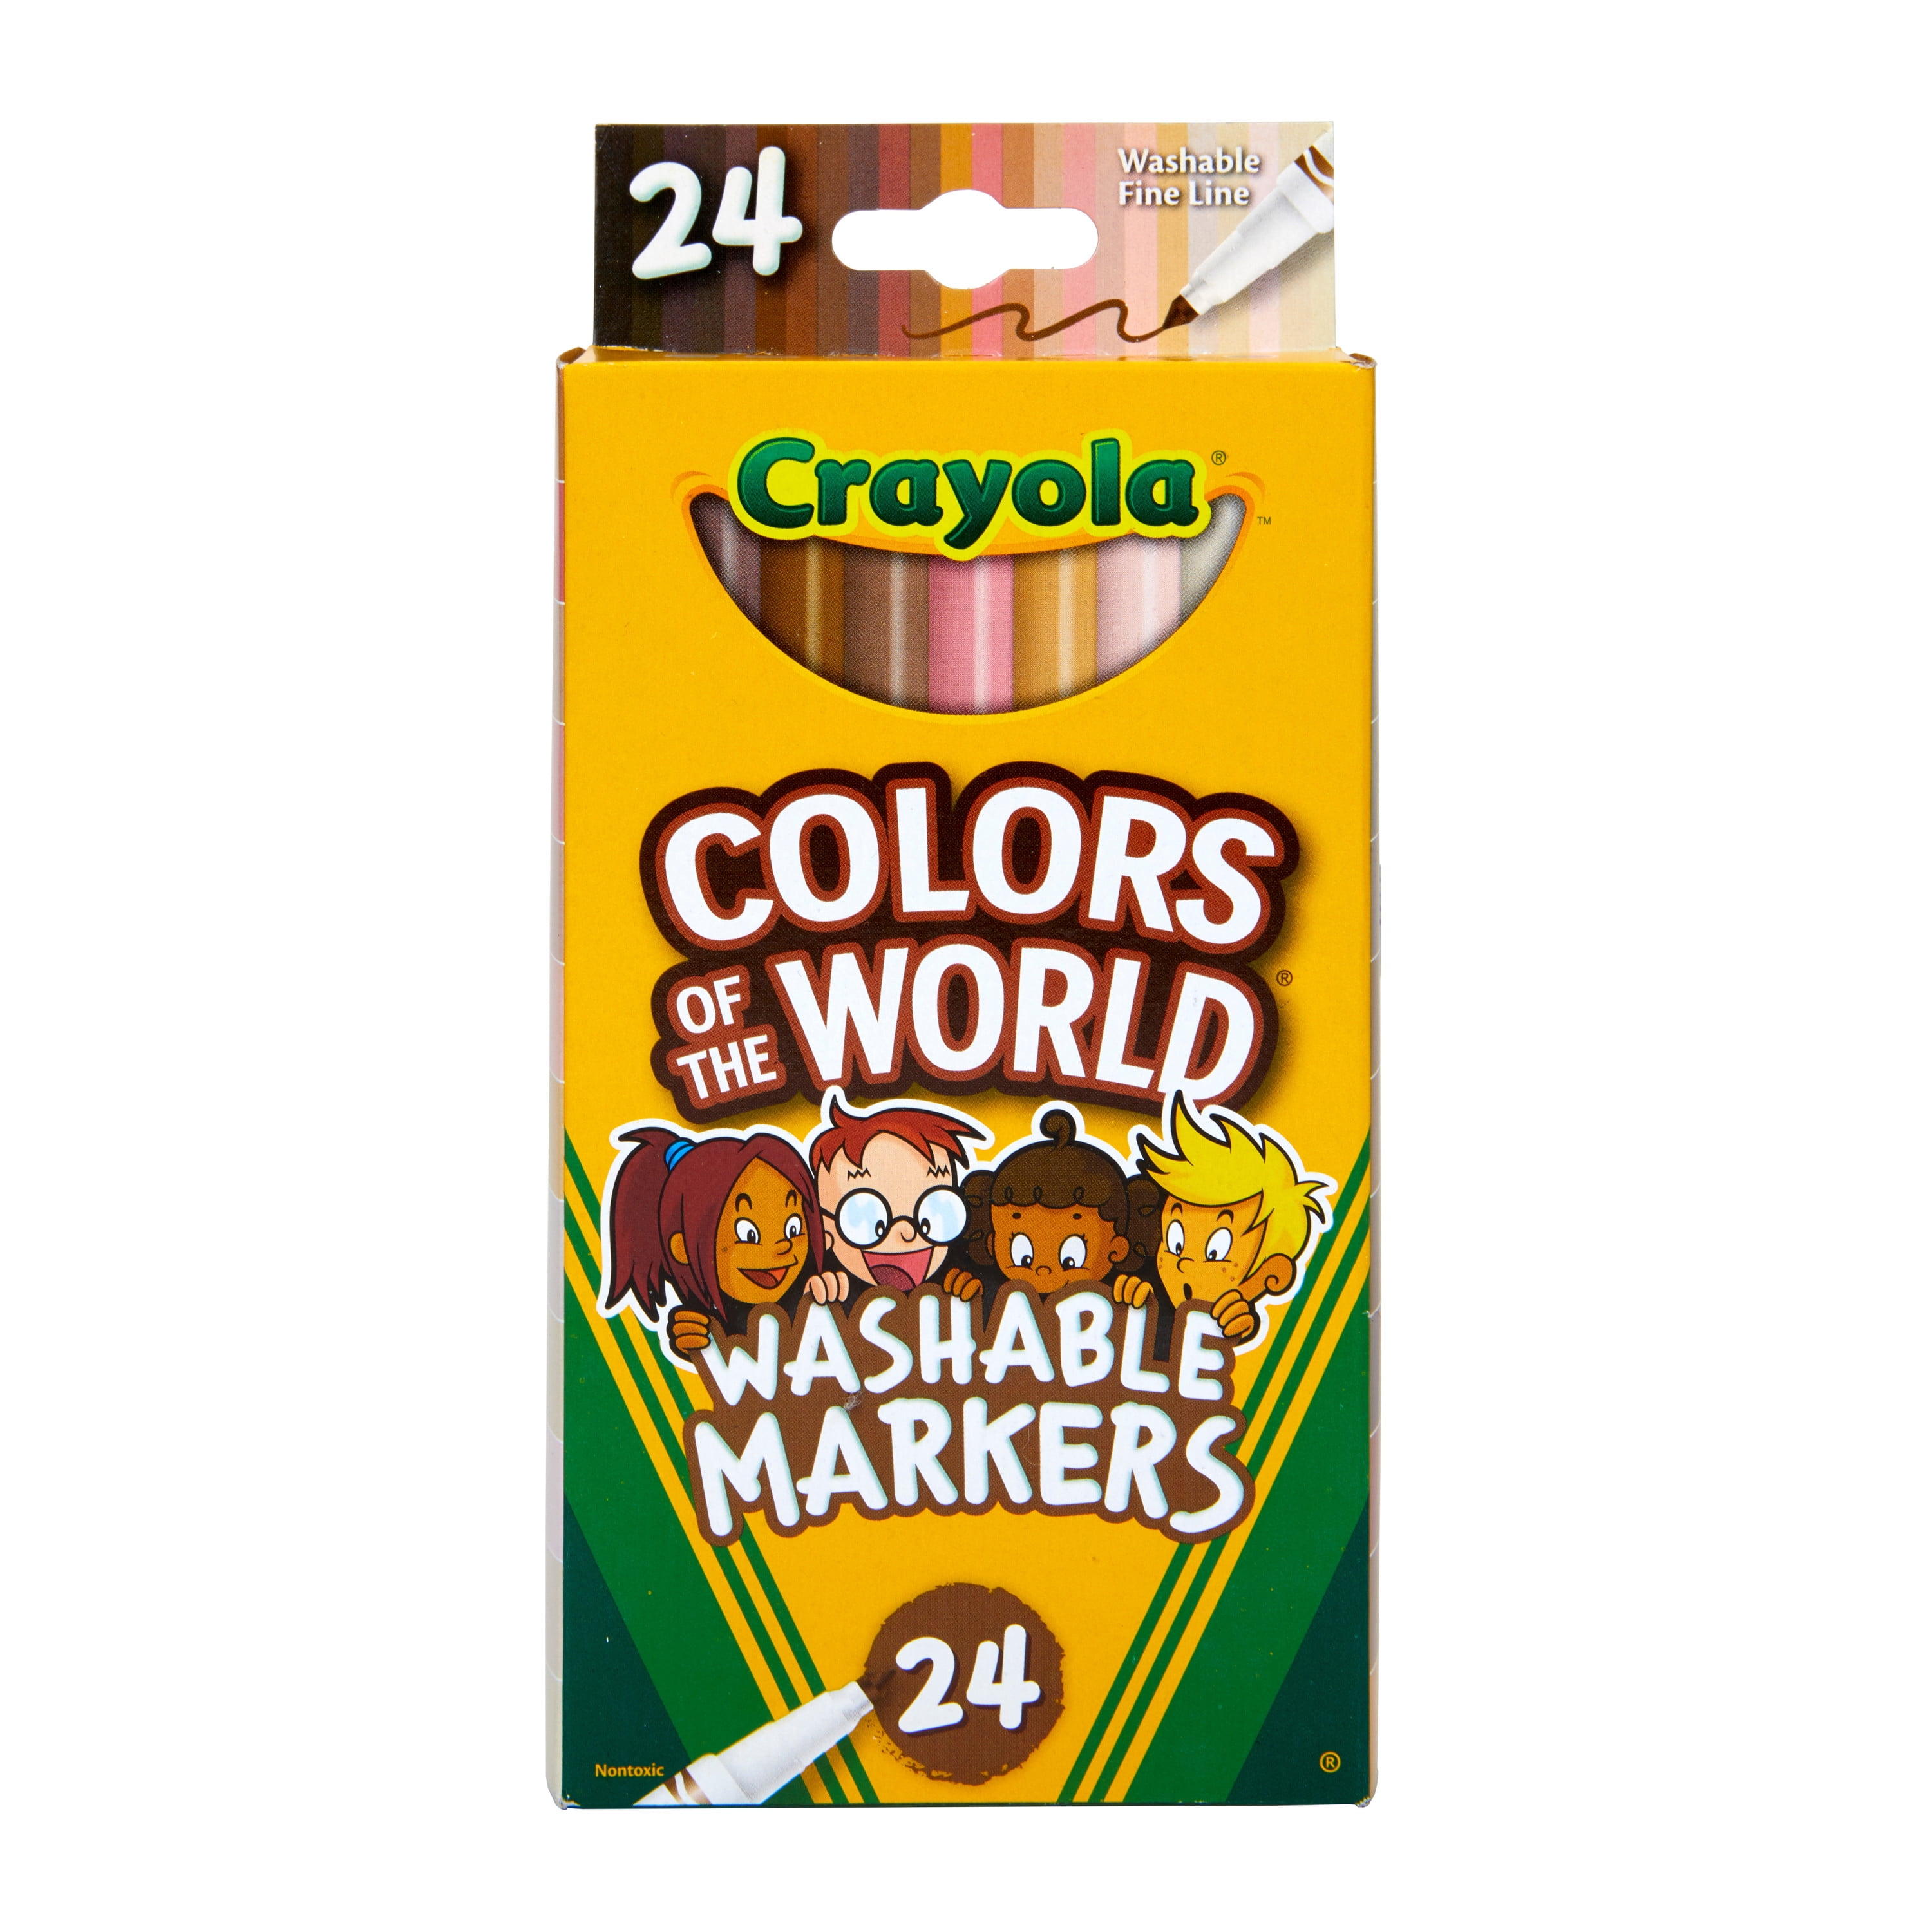 Swatch Form: Crayola Colors of the World Markers 24pc. 